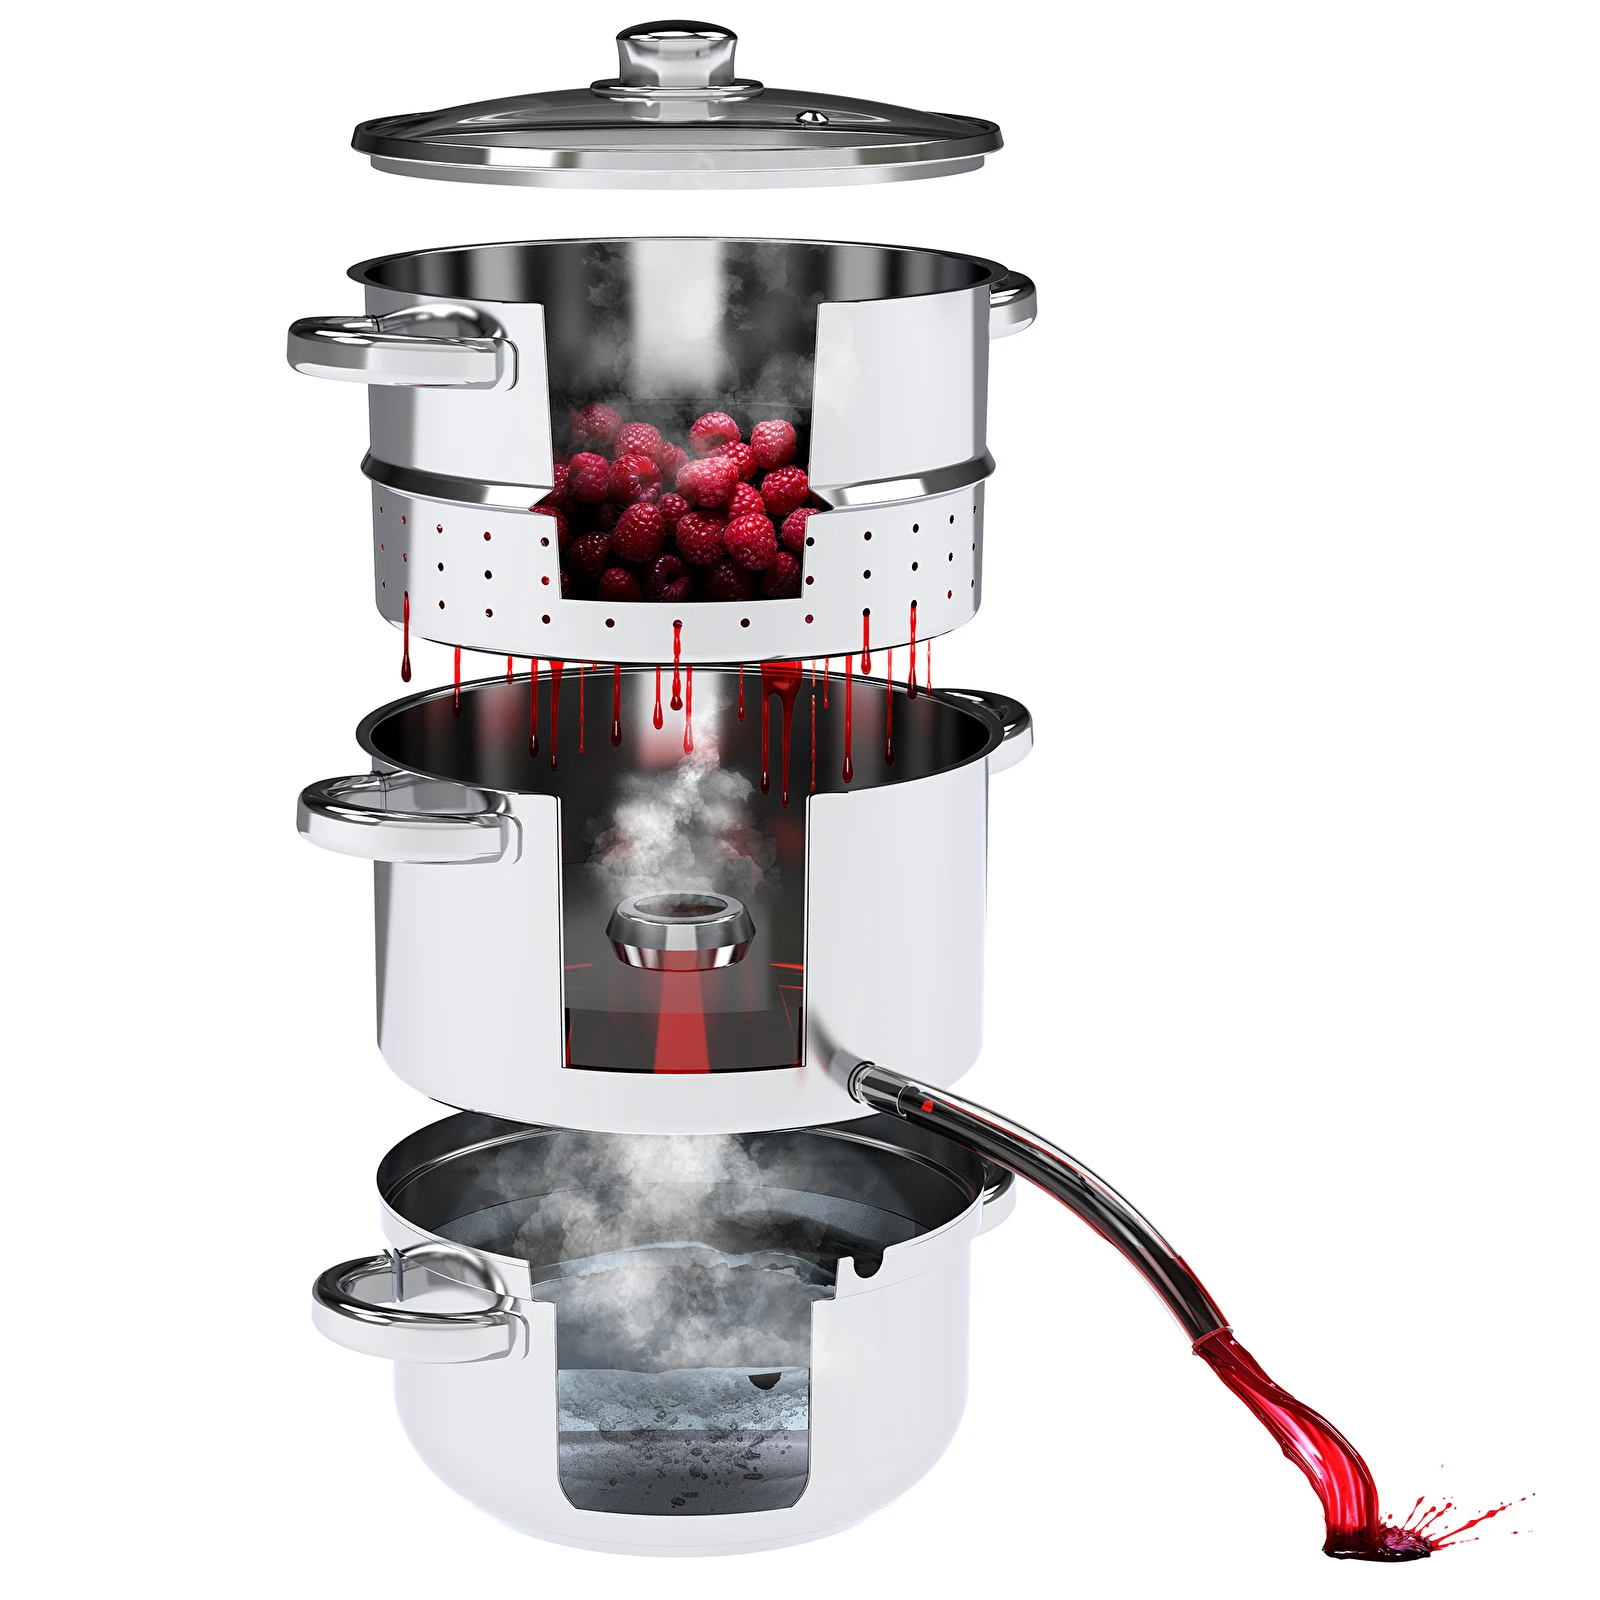 VINEYARD Deluxe Stainless Steel Steam Juicer By Roots & Branches